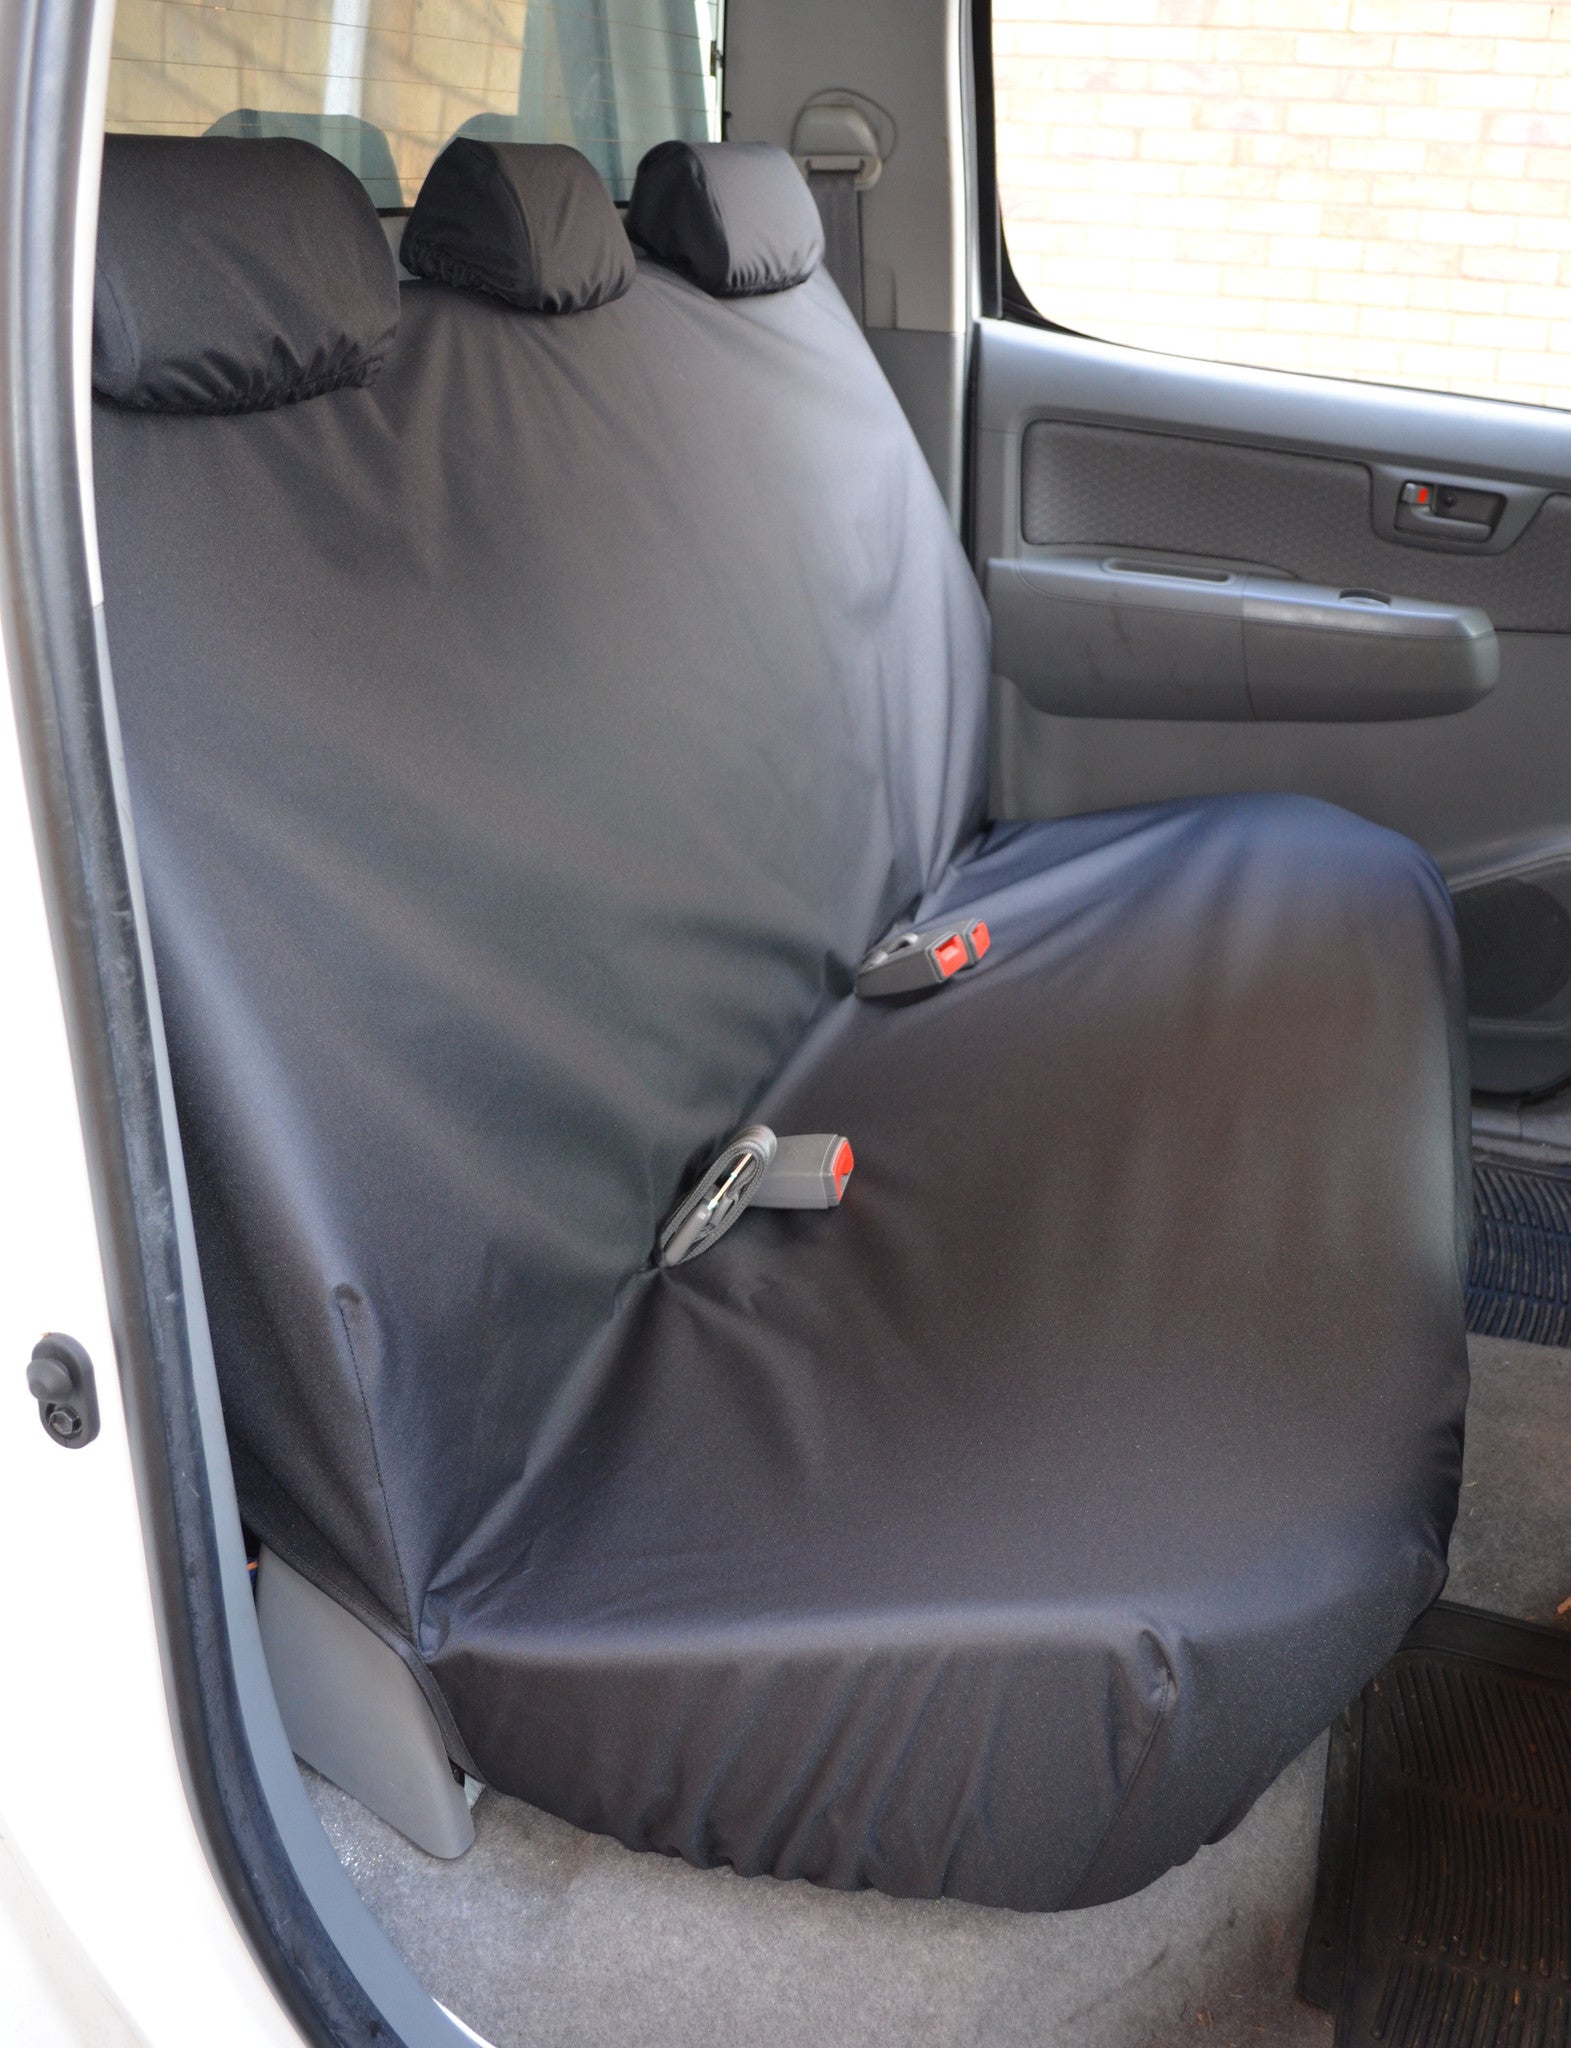 Toyota Hilux 2005 - 2016 Seat Covers Front &amp; Double Cab Rear / Black Turtle Covers Ltd